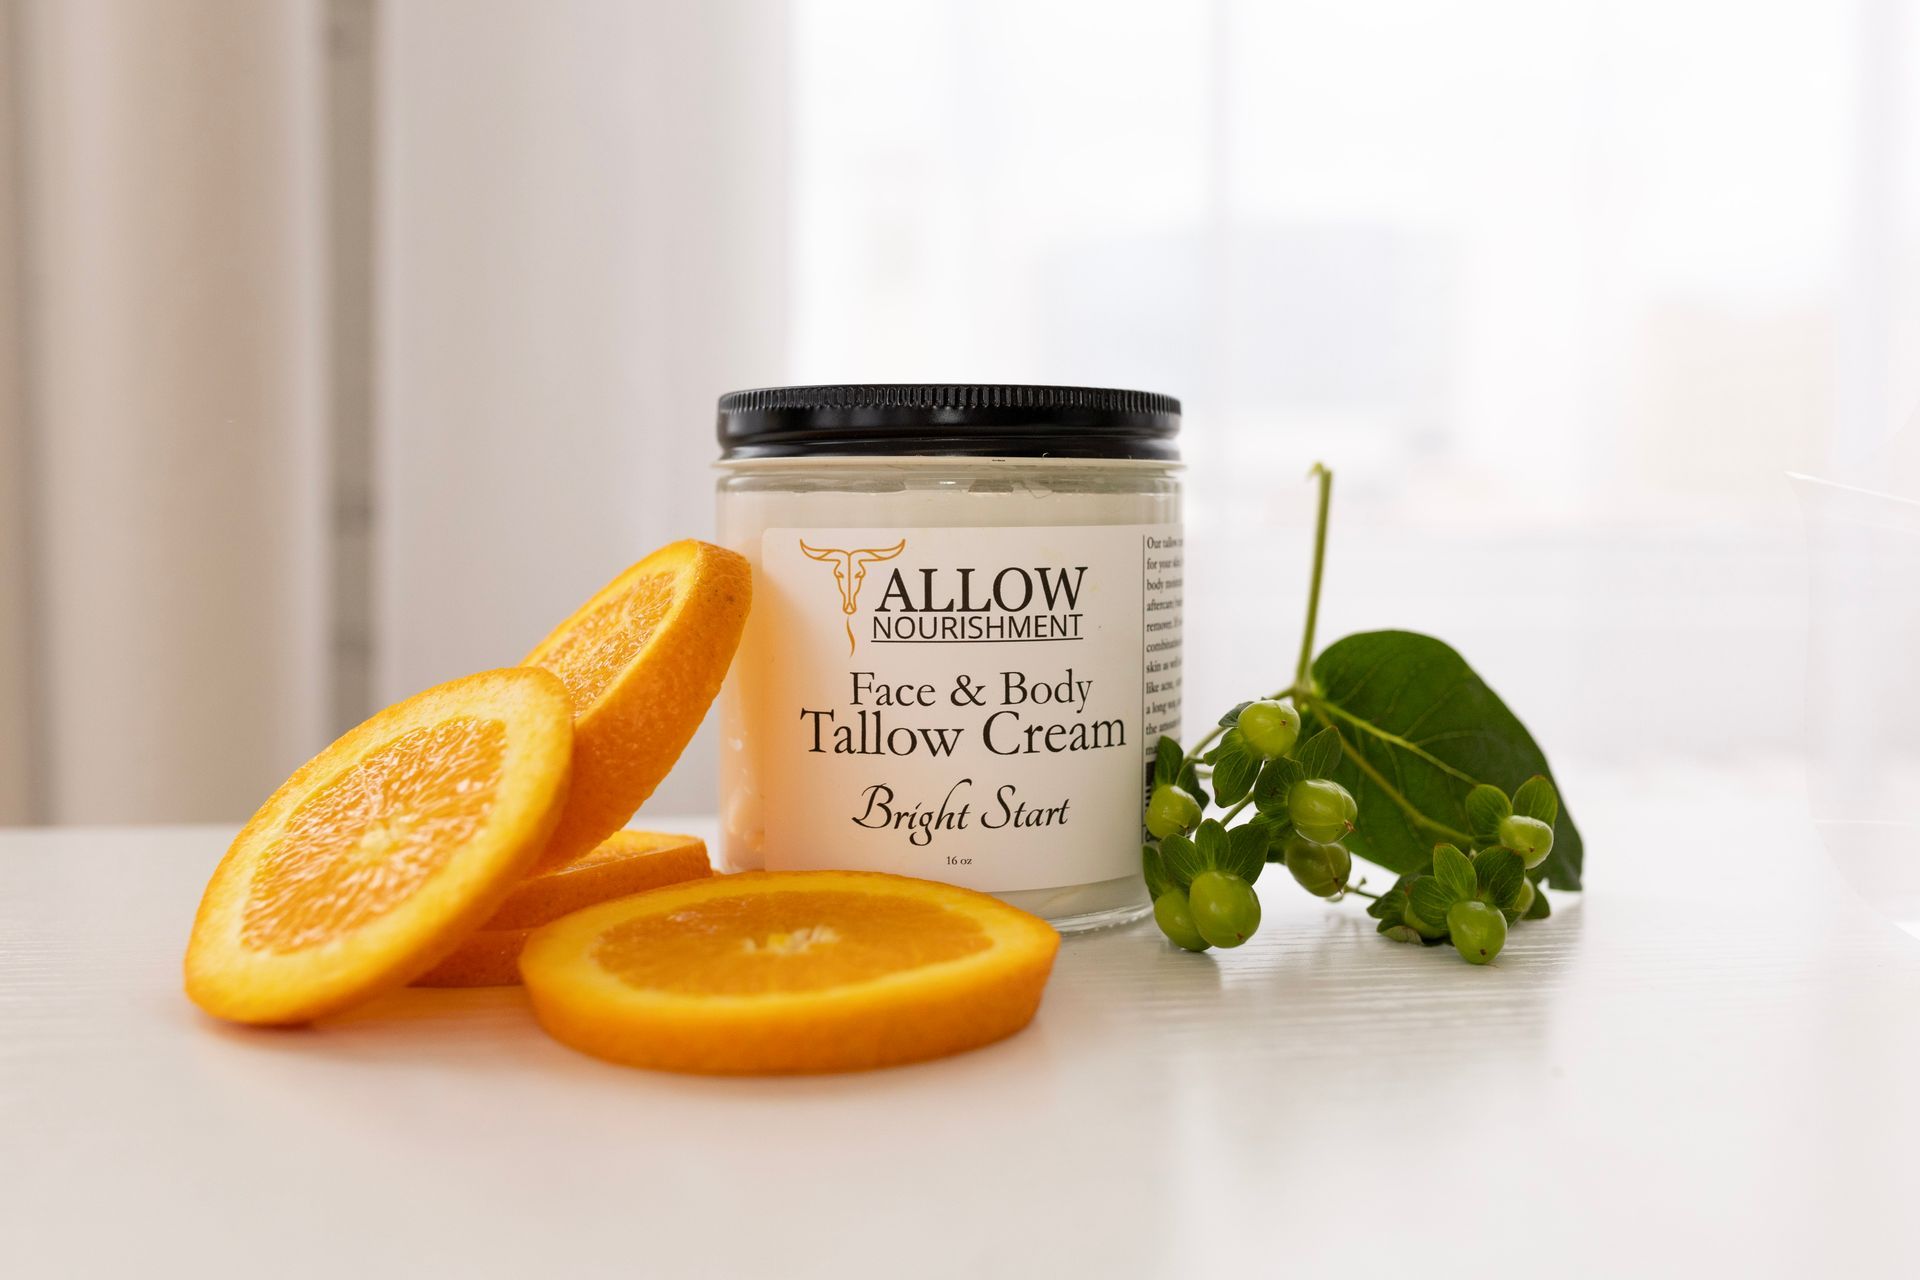 A jar of Bright Start tallow face and body cream